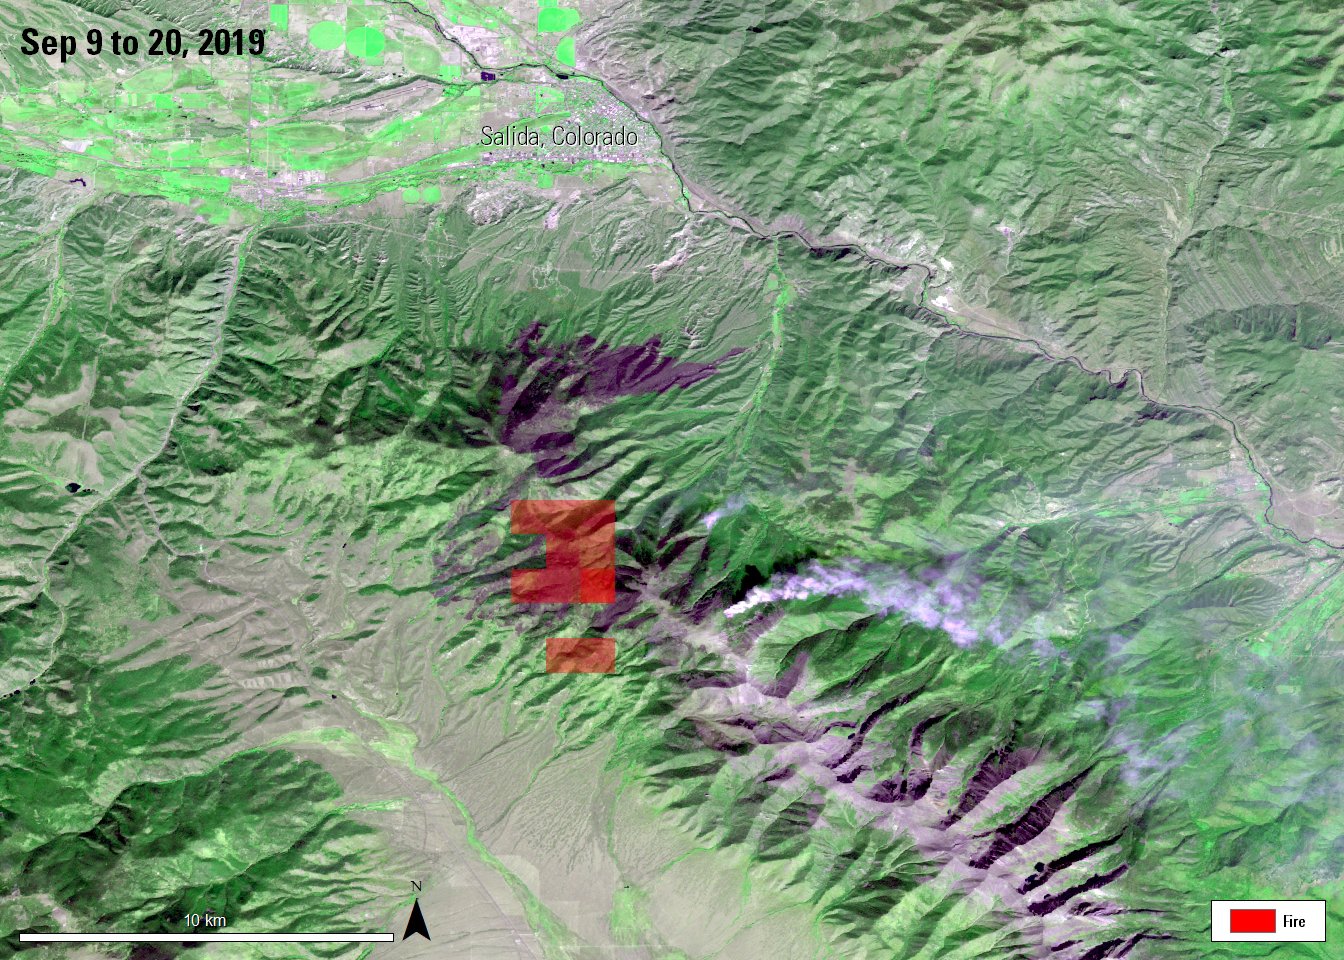 VNP14 products from Sep 9 to Sep 20, 2019 overlaid on AST_L1T image of Decker Fire near Salida, Colorado, acquired on October 12, 2019.